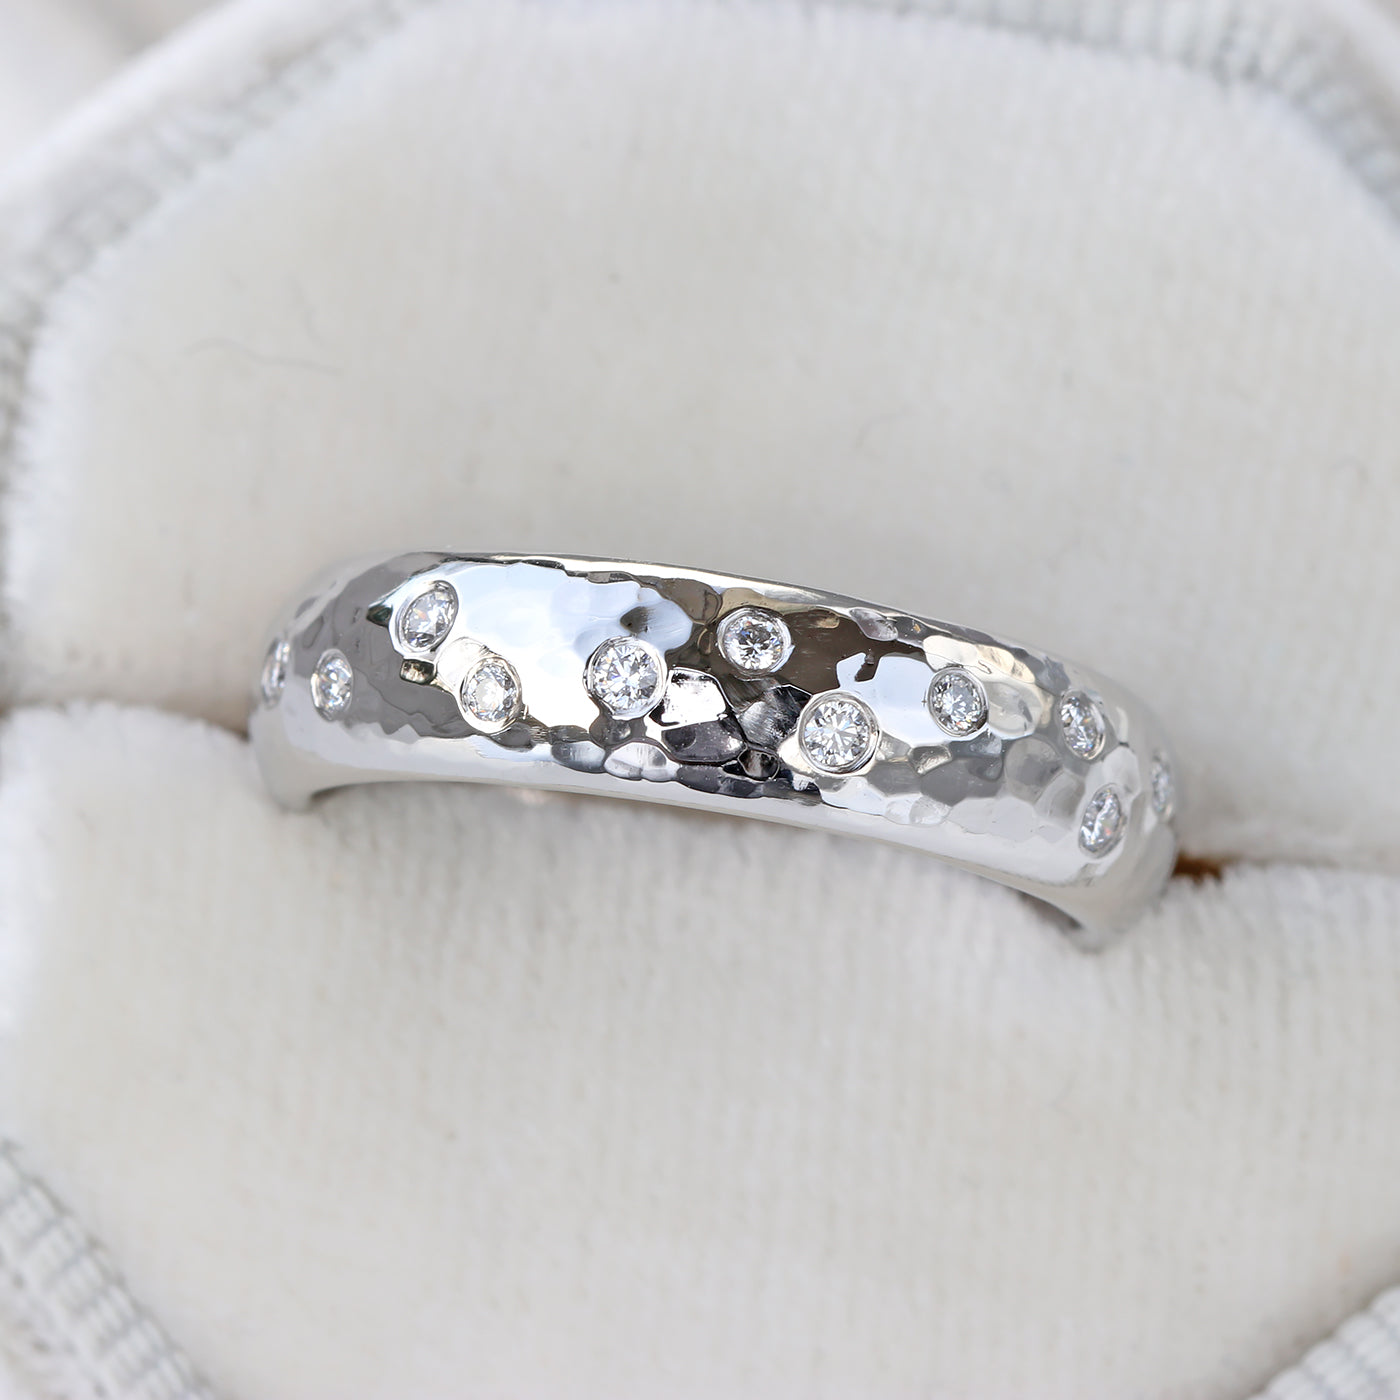 Chunky Hammered Diamond Wedding or Eternity Ring in Platinum - Size M 1/2